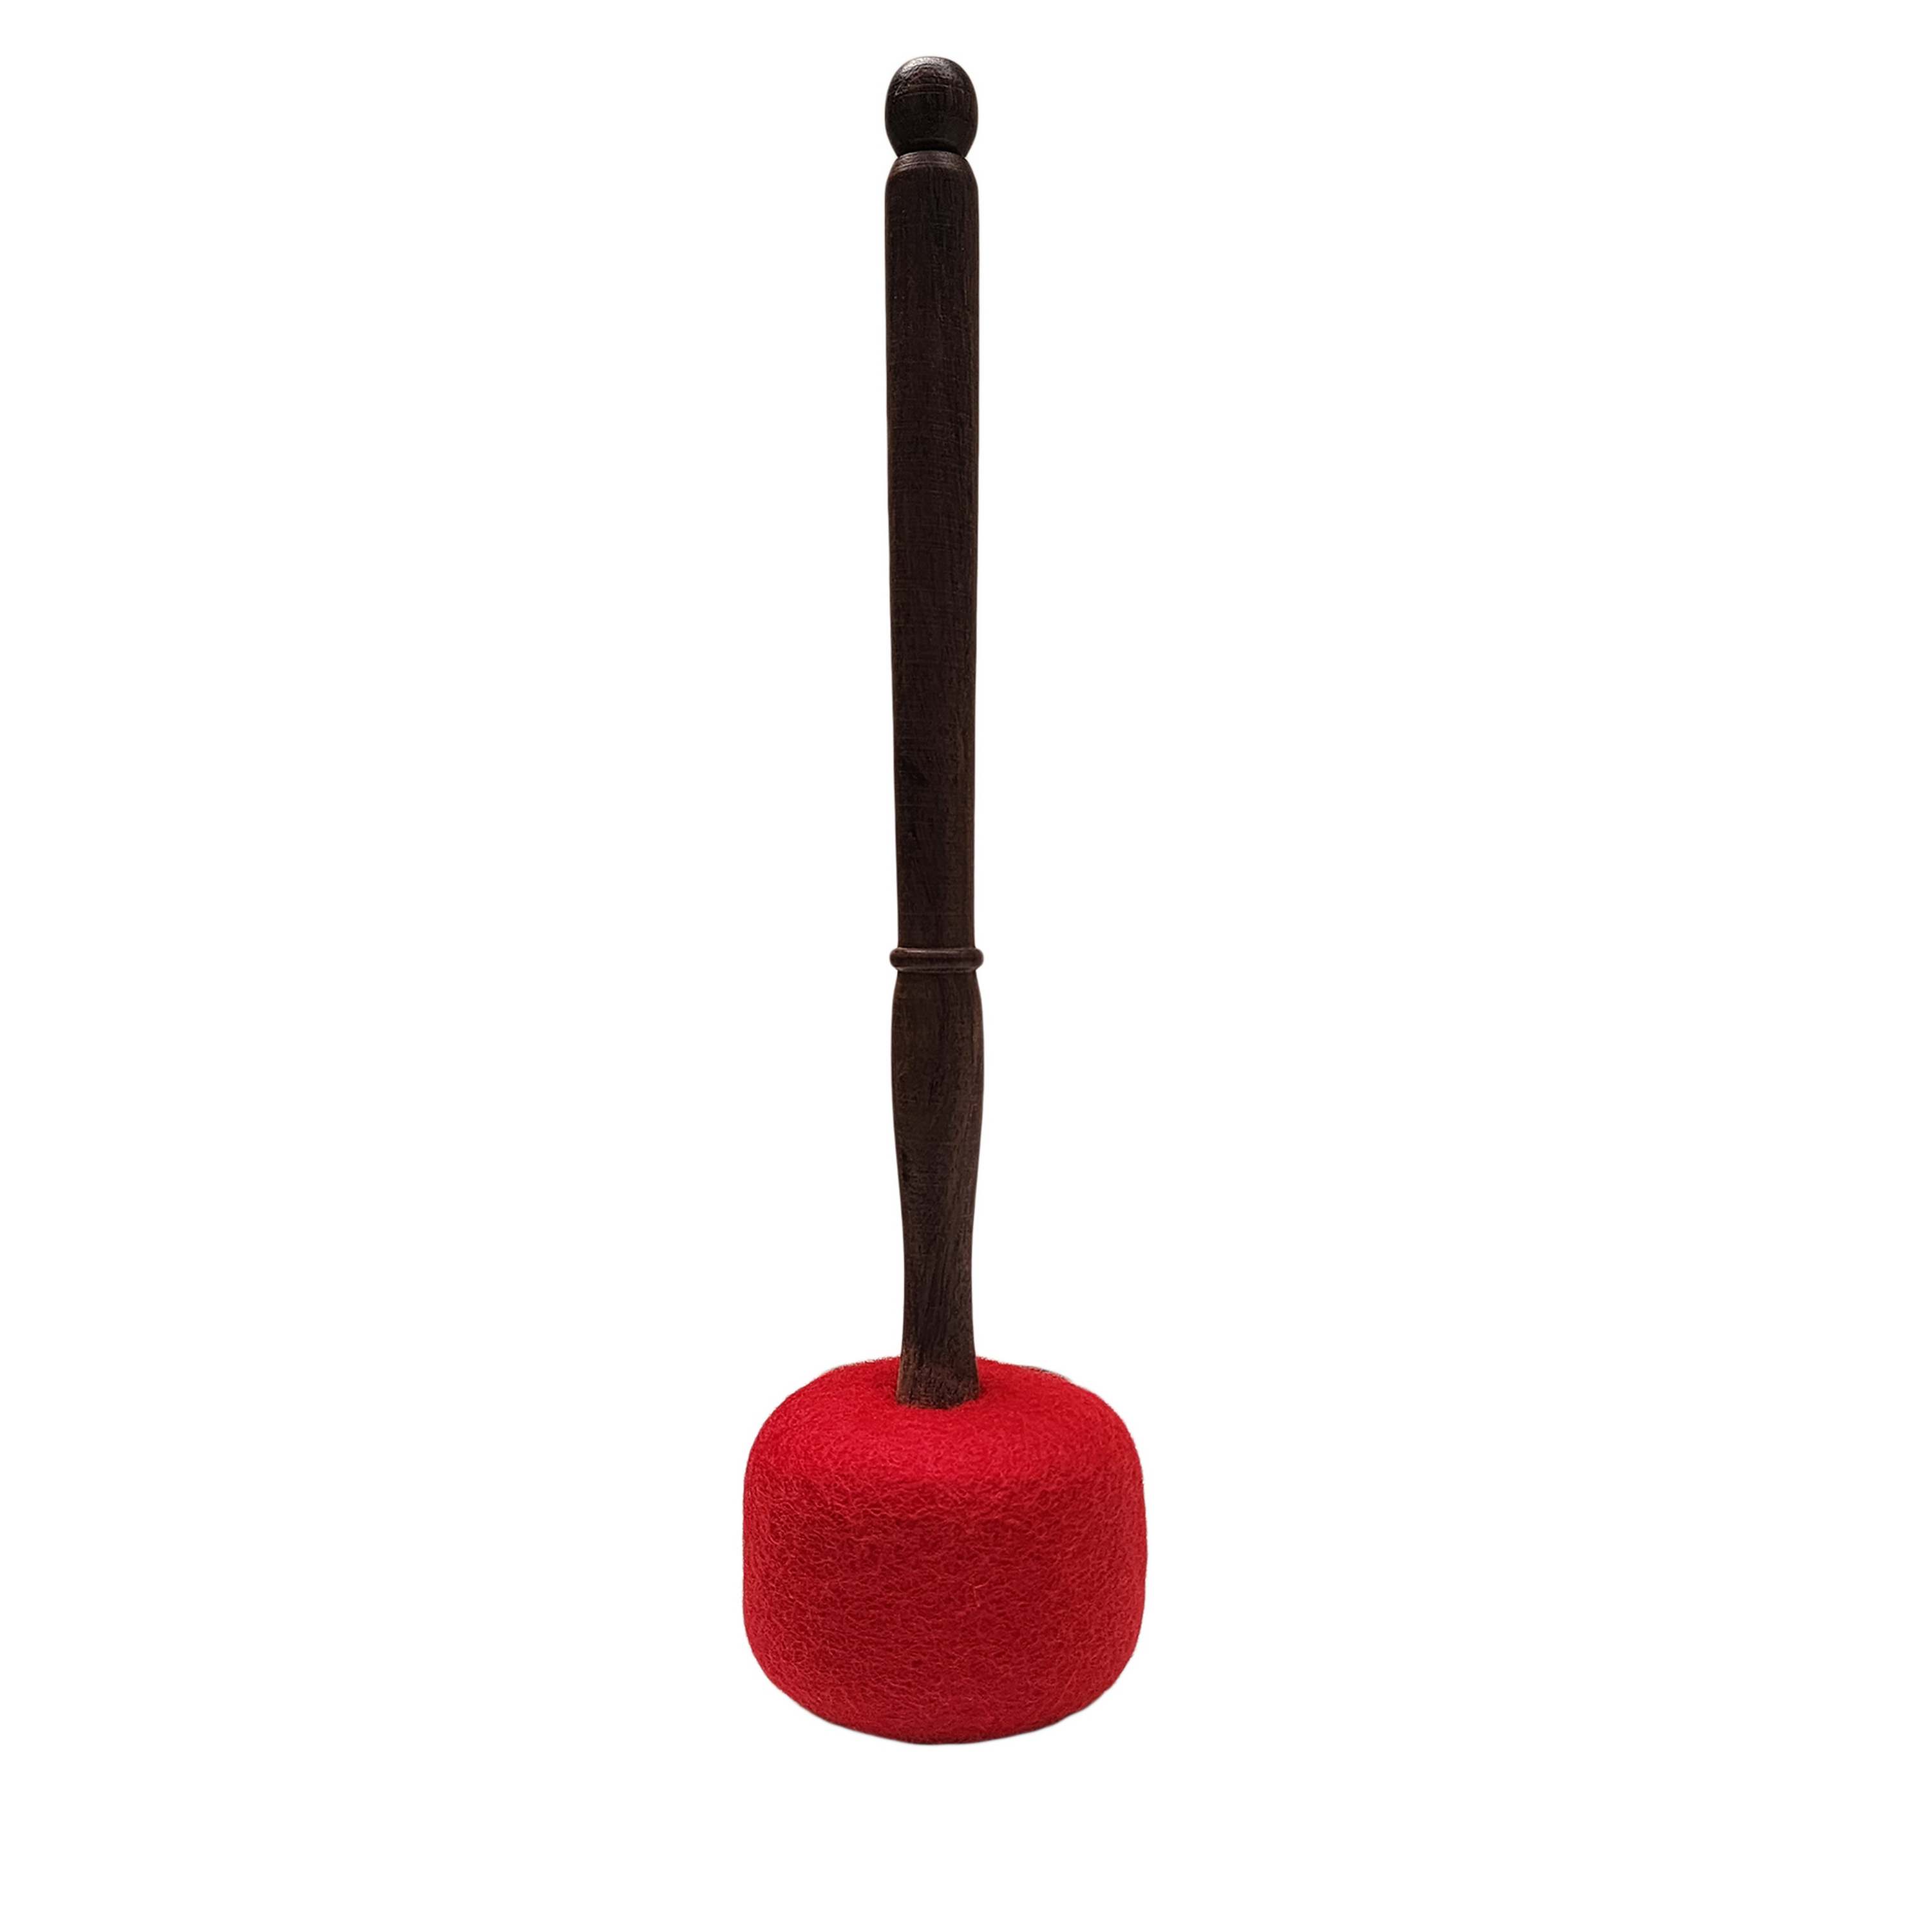 Singing Bowl Accessories, Soft Felt Beating Mallet, Normal